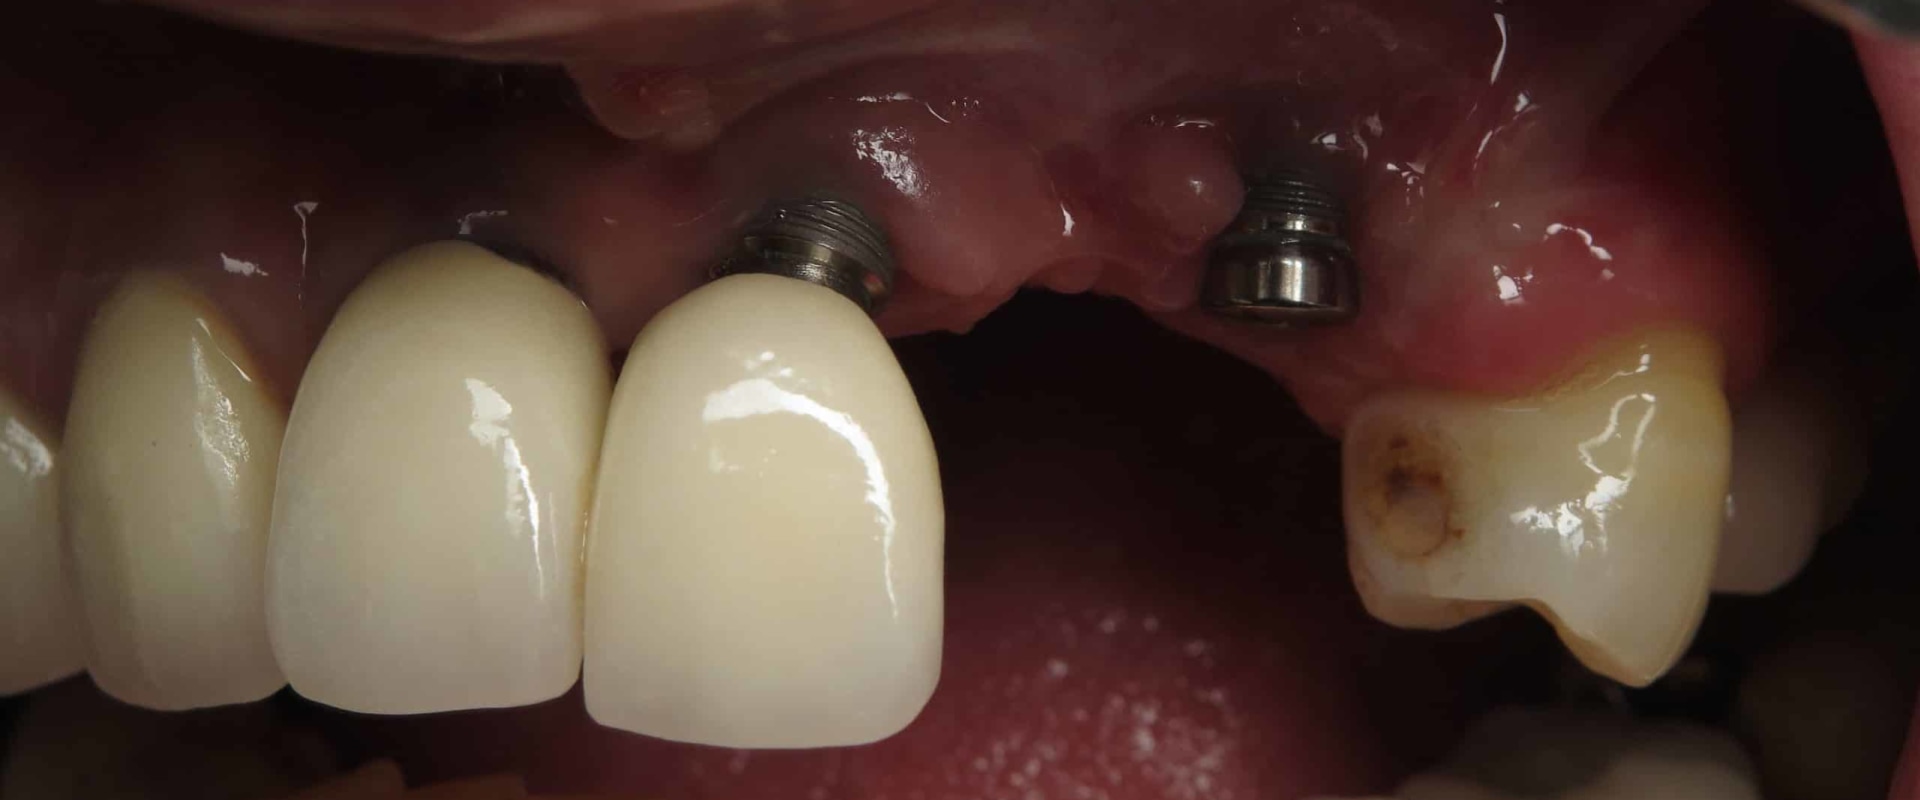 How Long Does it Take for a Dental Implant to Fail?